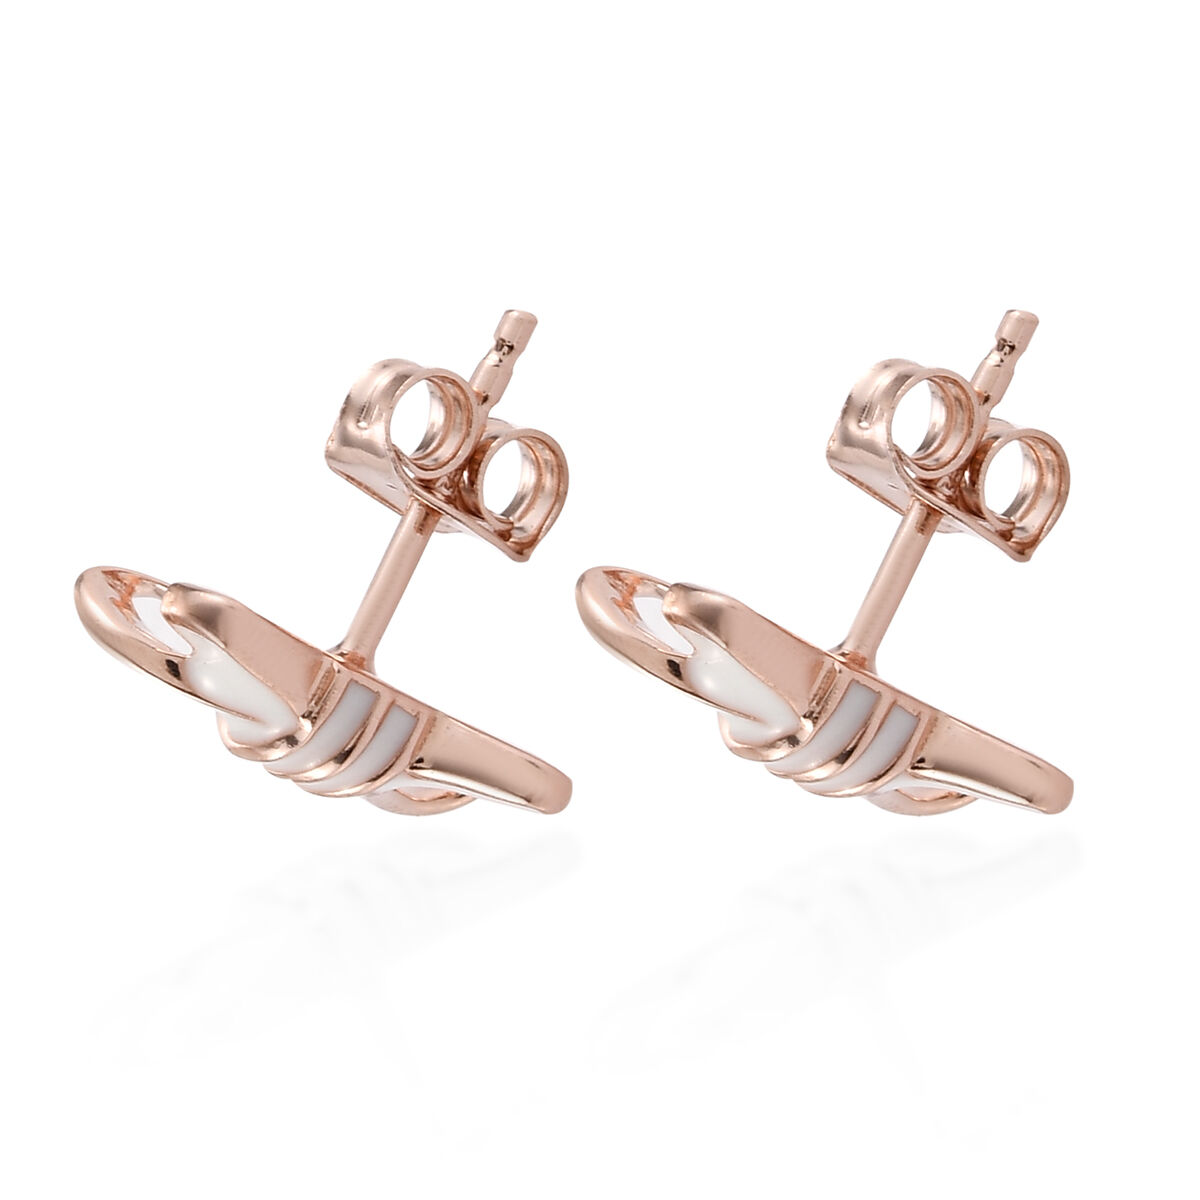 TJC Bow Earrings for Women in Sterling Silver Gift for Her